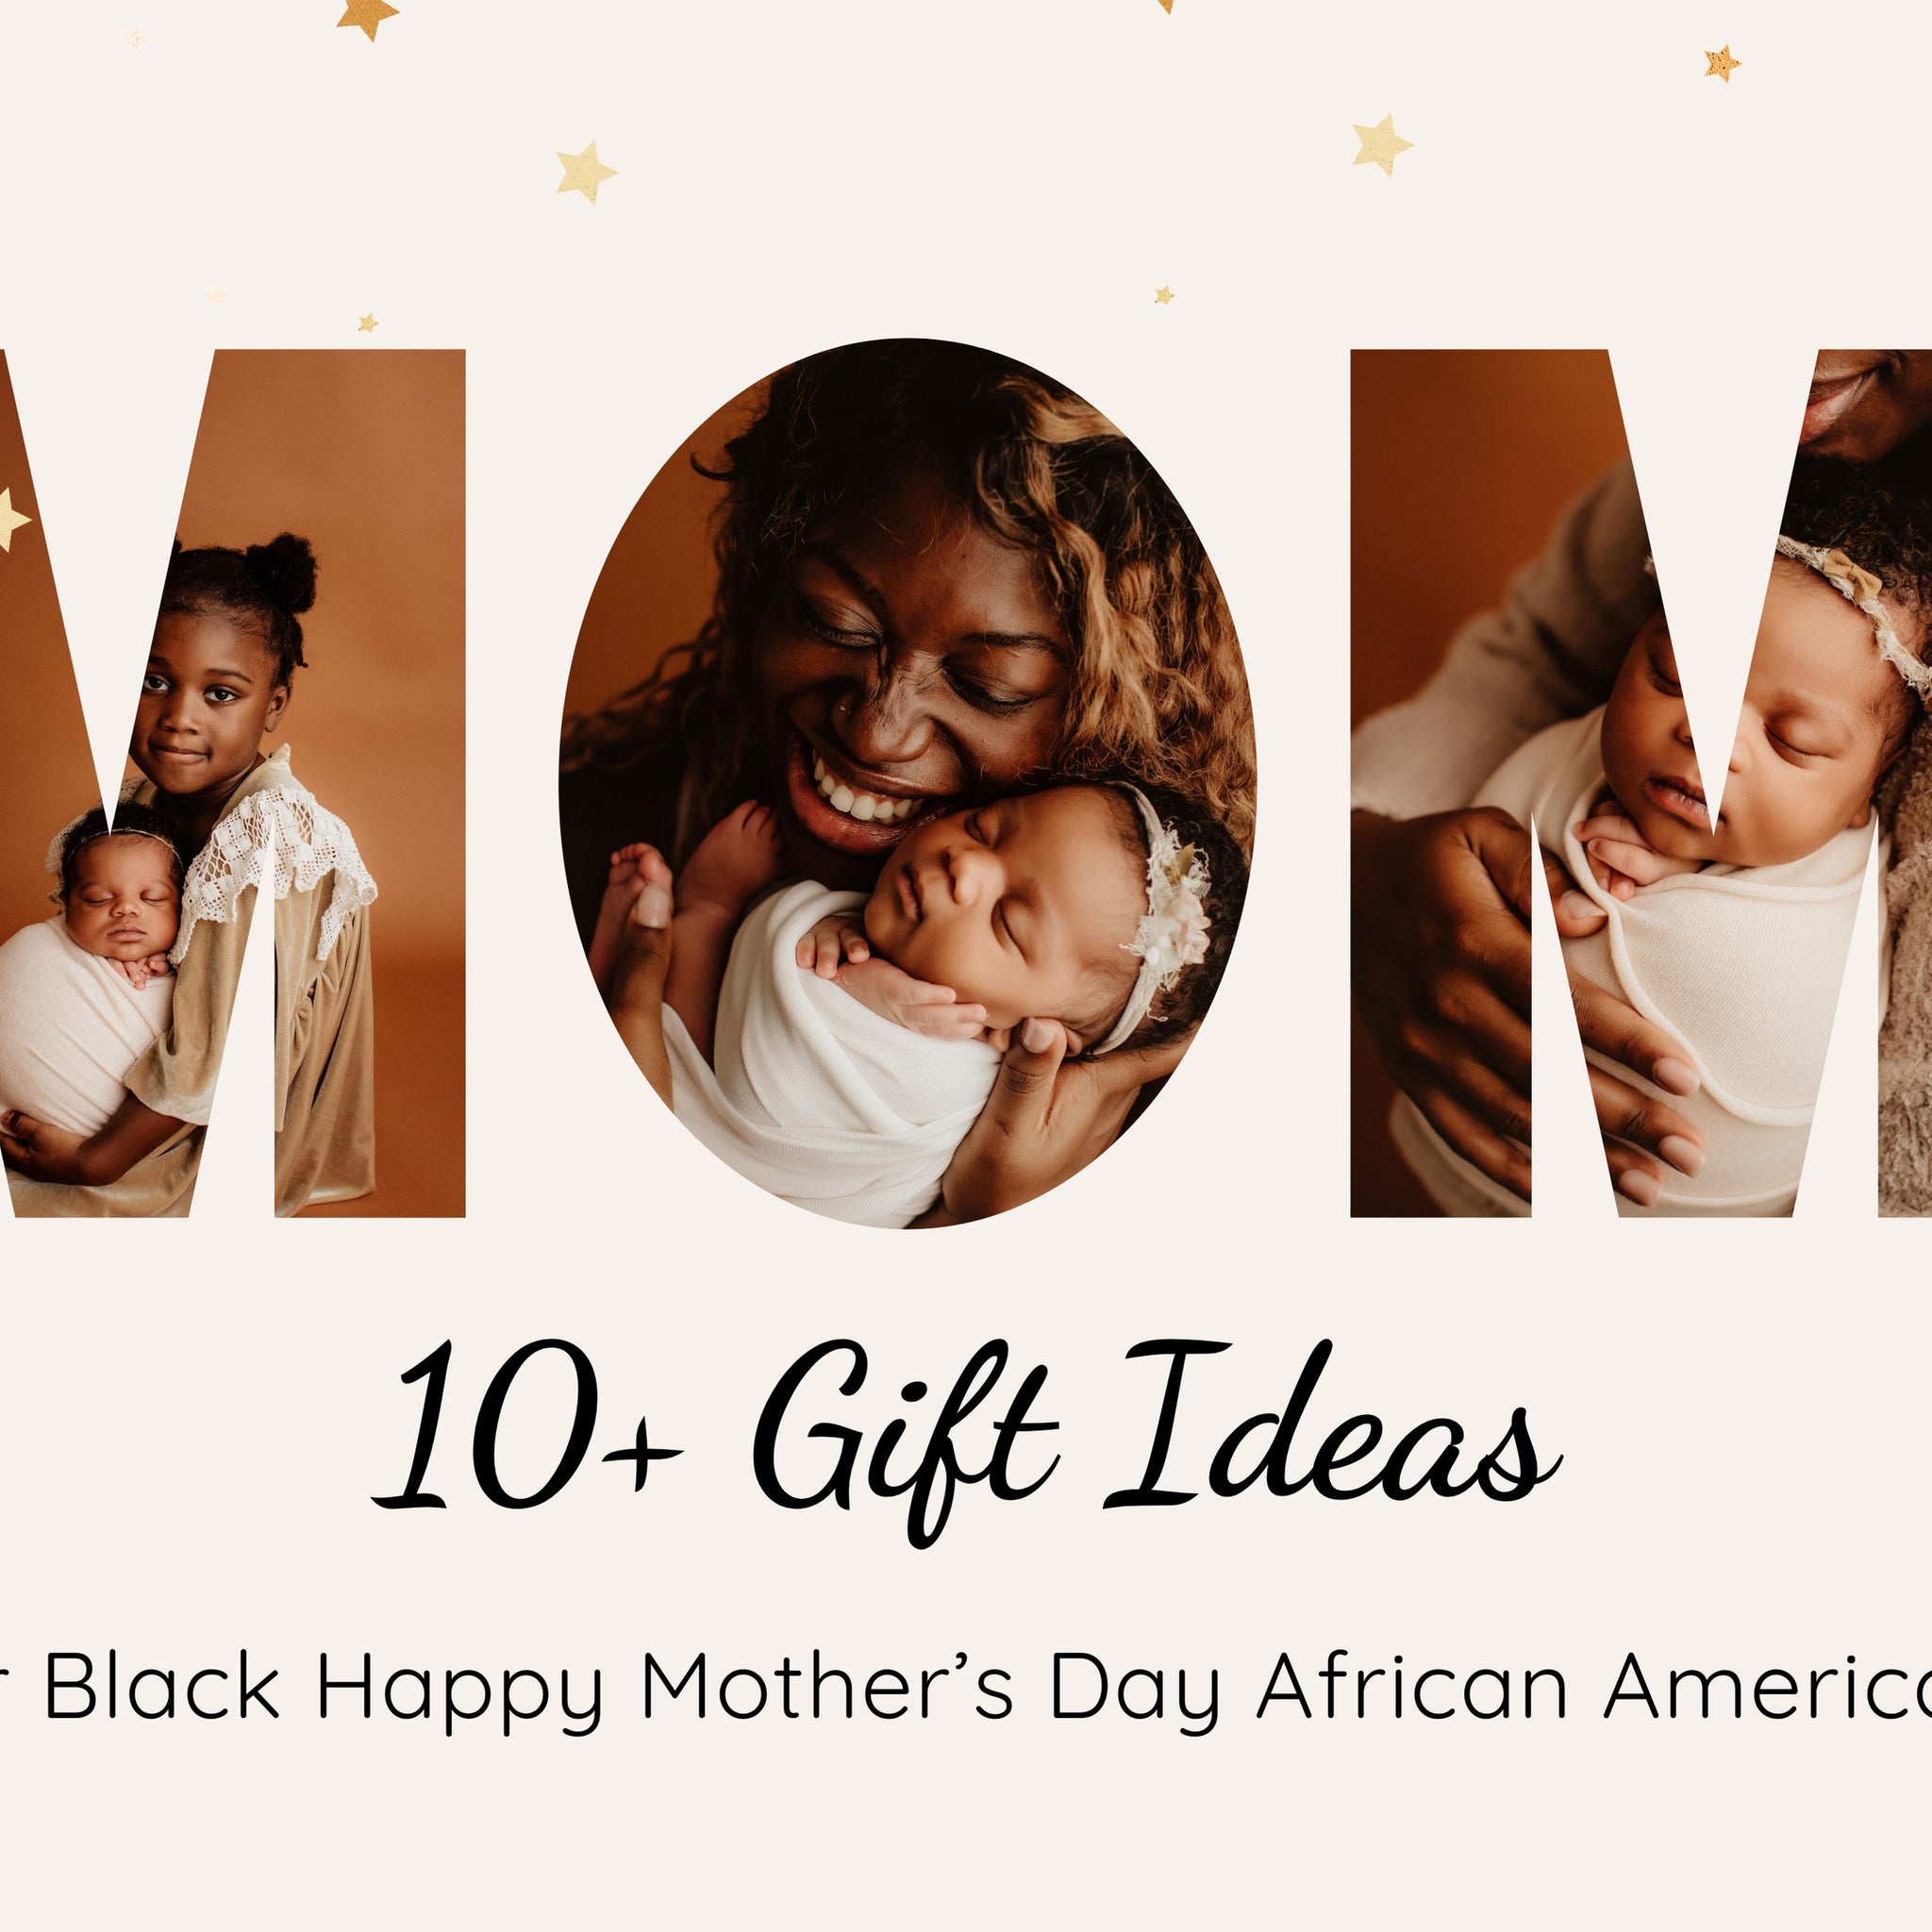 Black Happy Mother’s Day African Americans